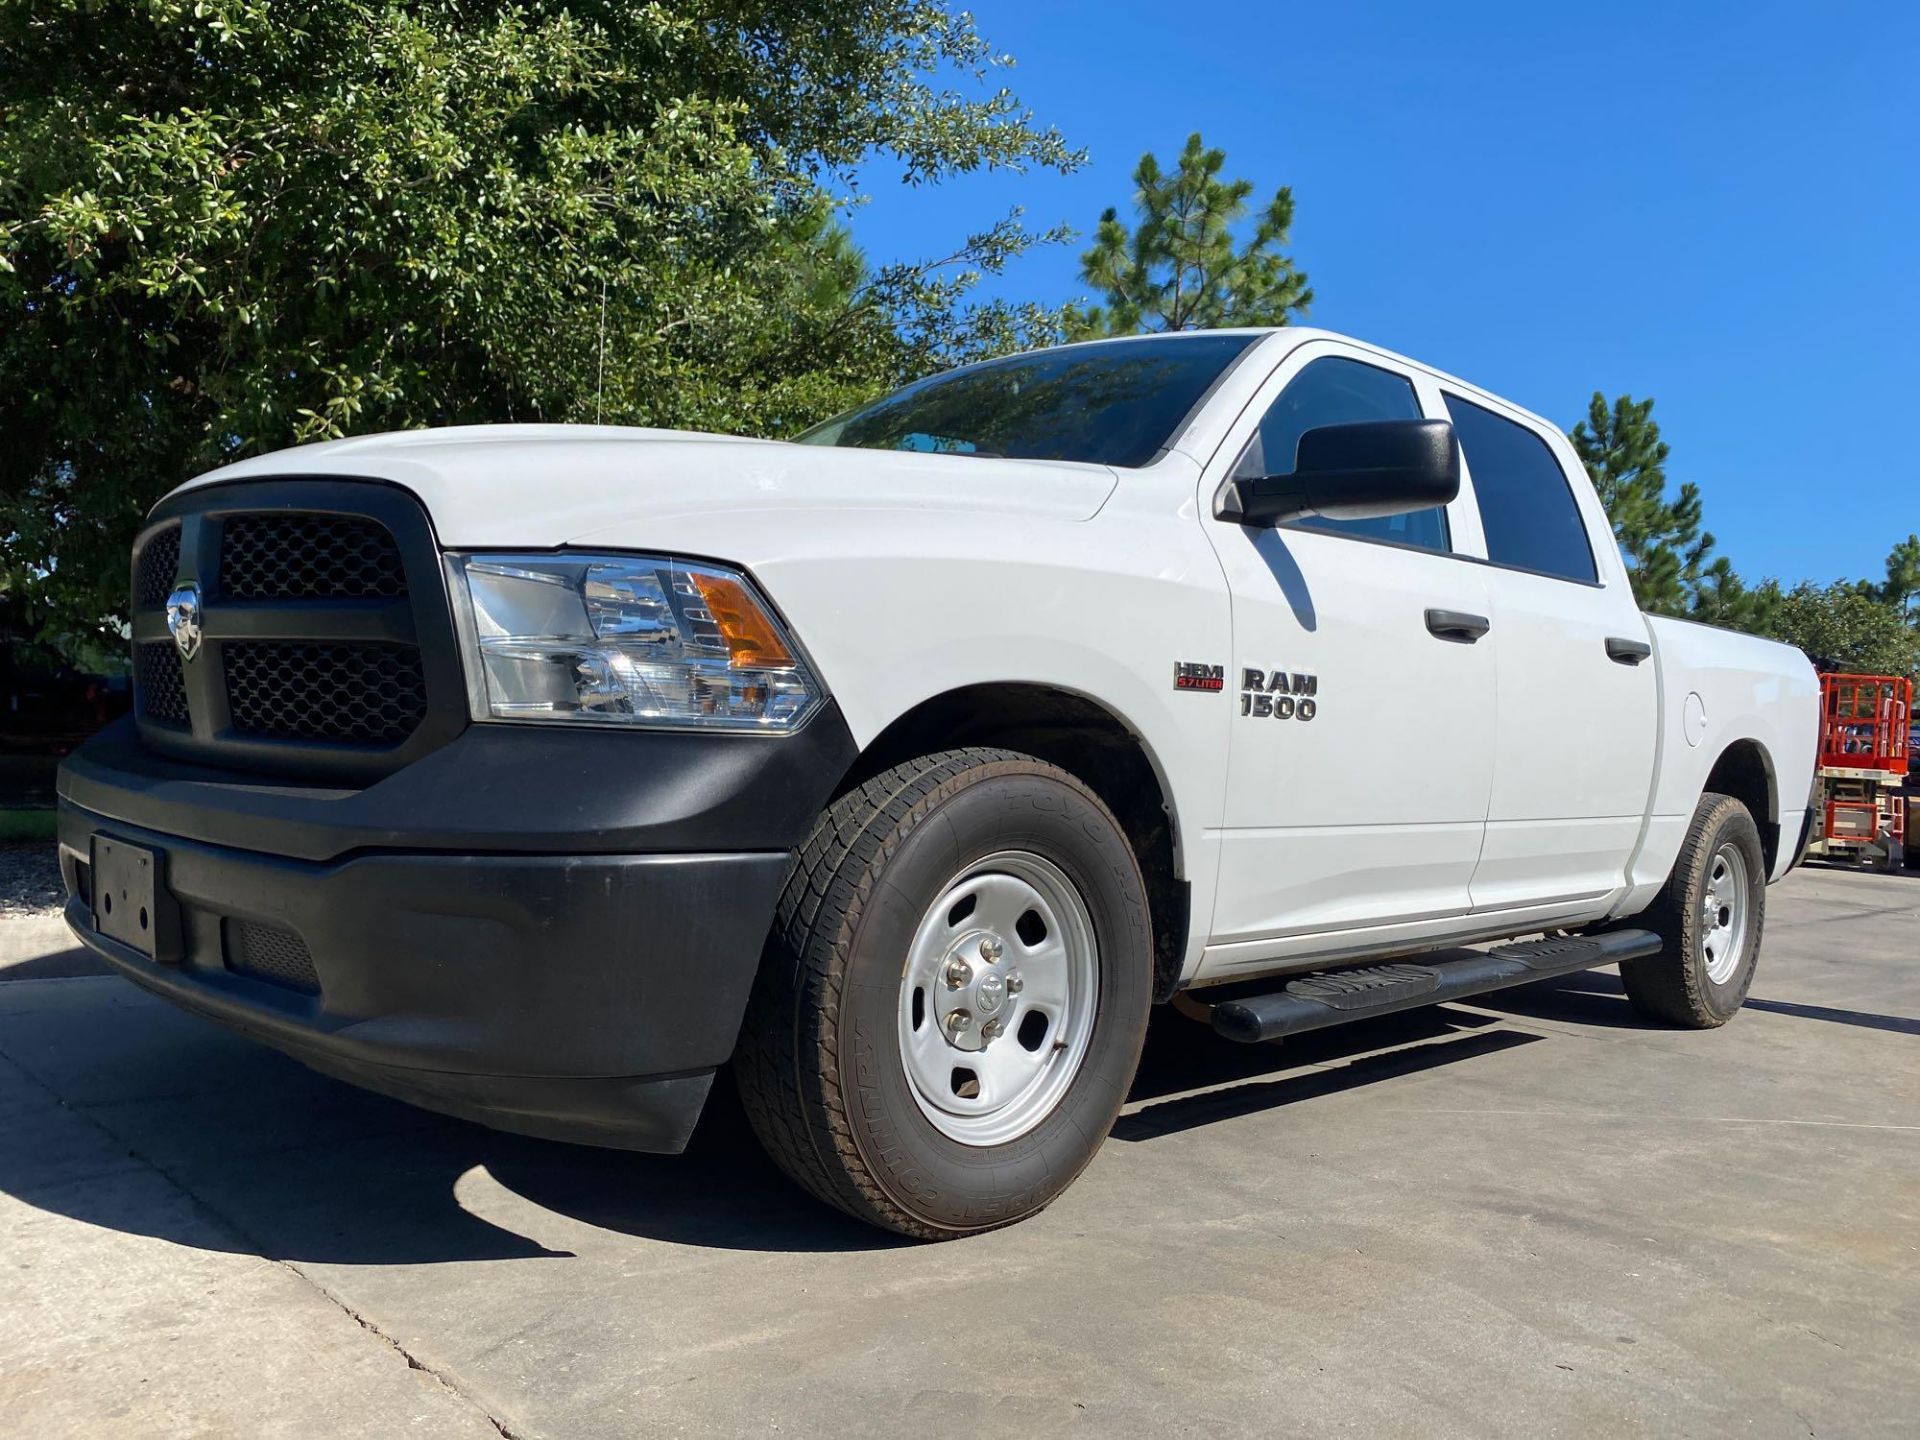 2015 DODGE 1500 HEMI CREW CAB PICK UP TRUCK, LEATHER SEATS, 86,302 MILES SHOWING, ICE COLD AIR, RUNS - Image 2 of 20